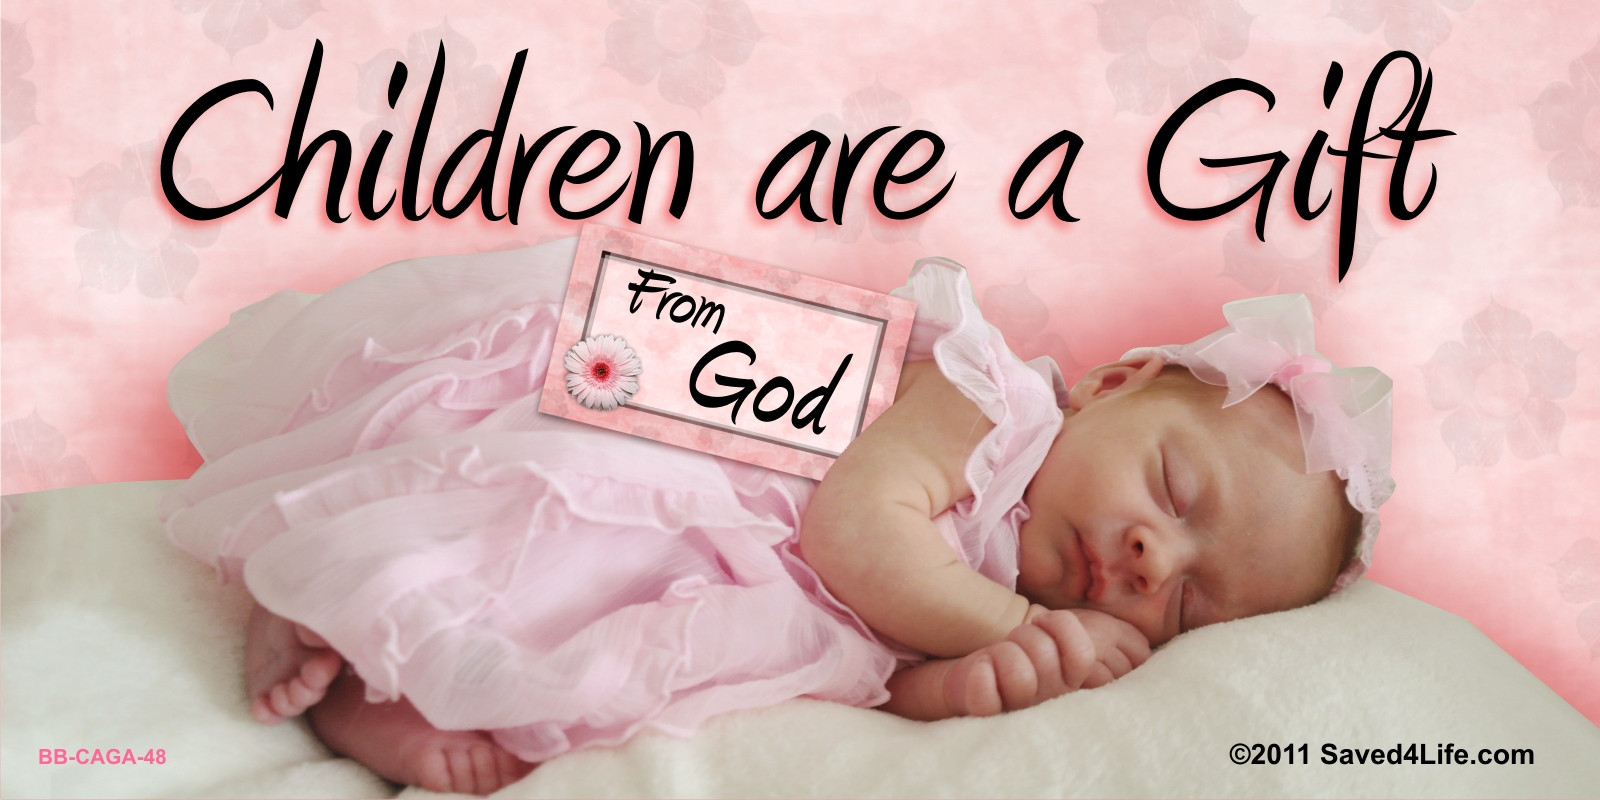 Children A Gift From God
 Just saw a gem of a bumper sticker childfree